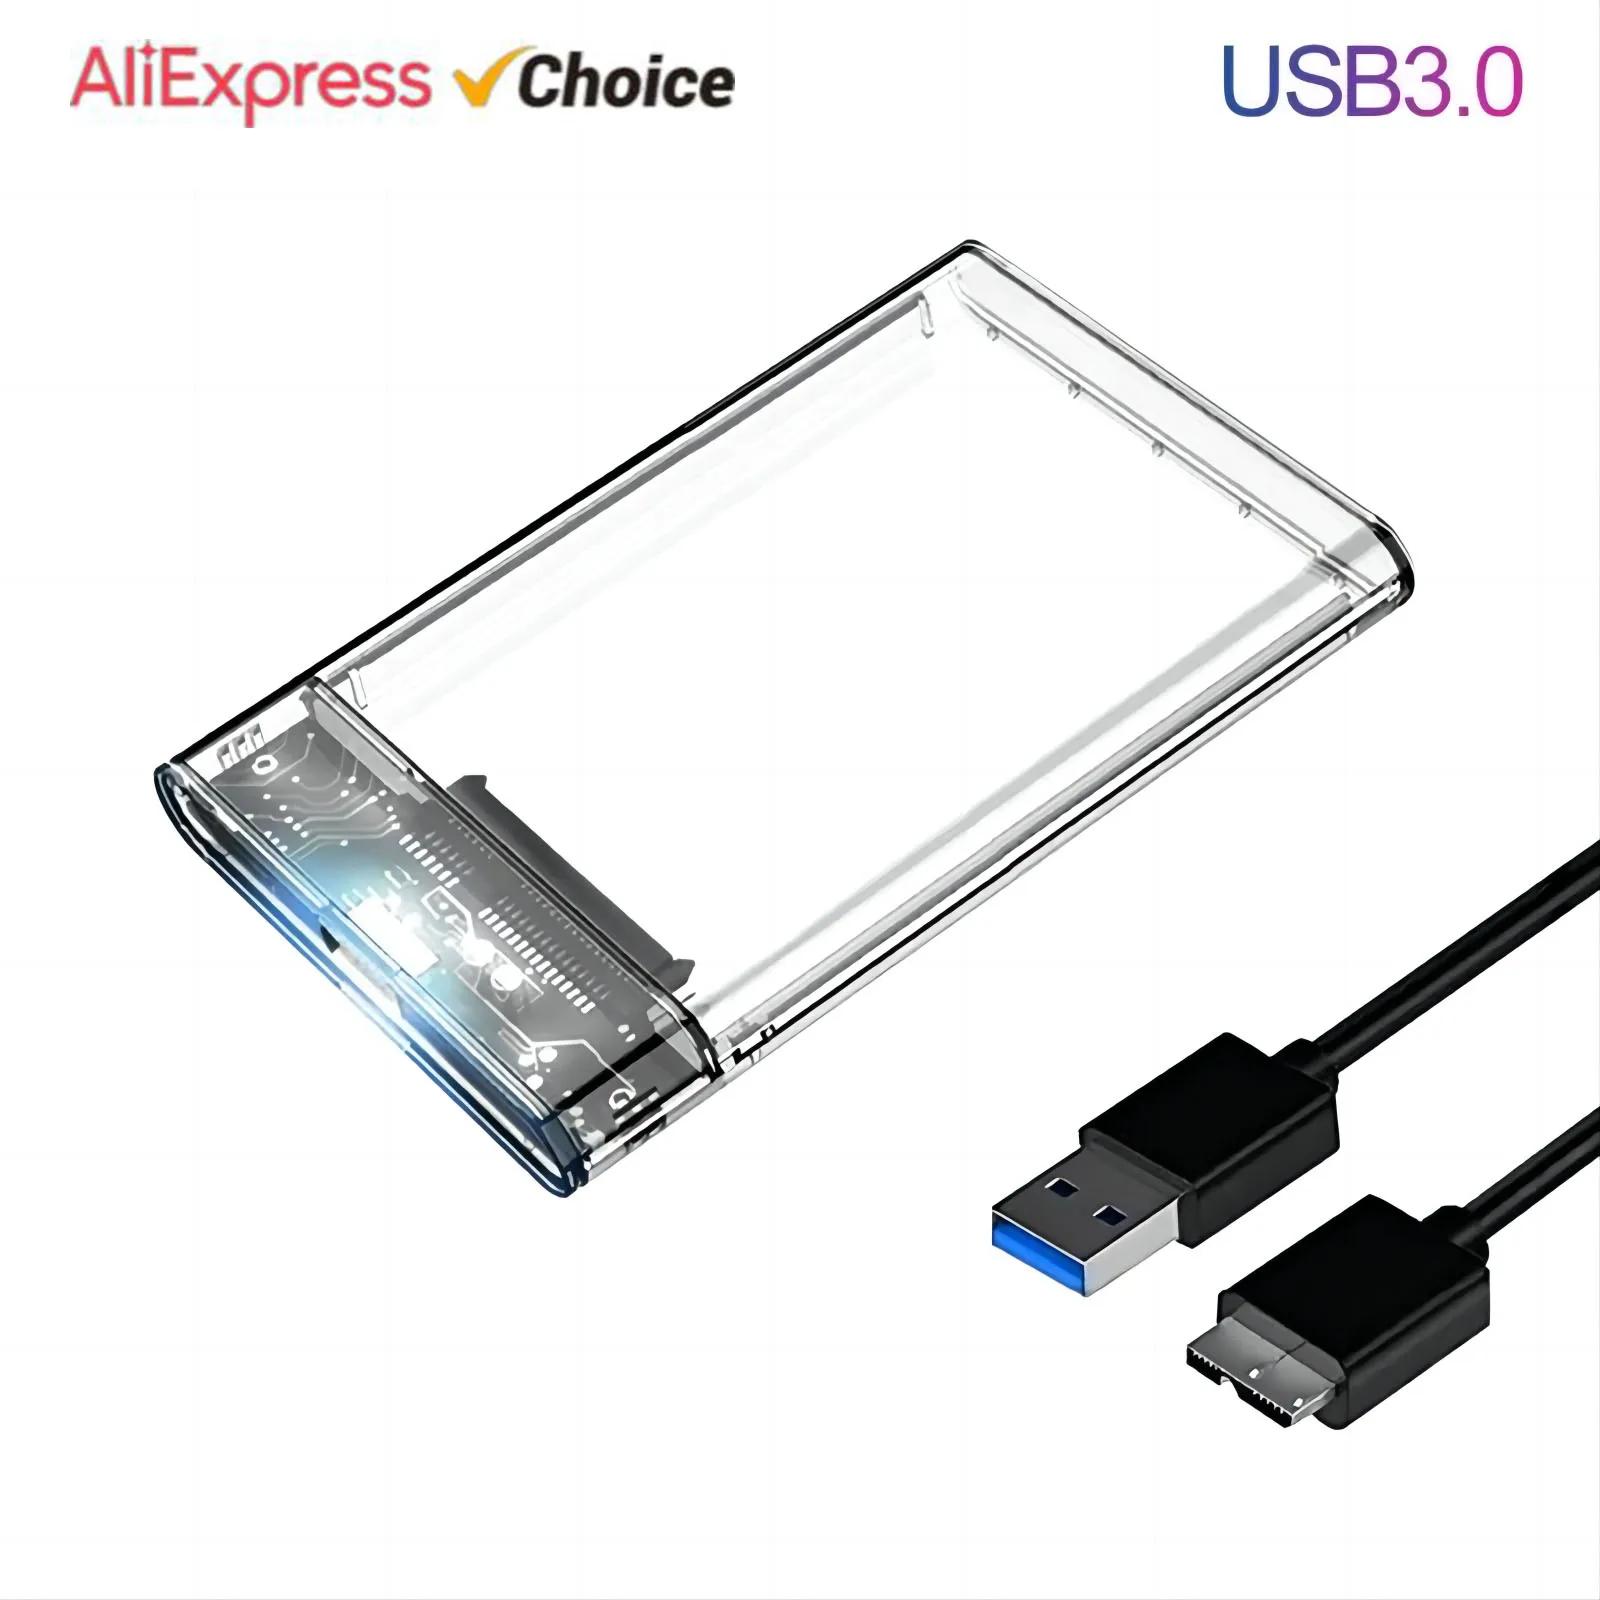 2.5 ġ  ܺ Ͽ¡, USB 3.0 SATA , UASP   ʿ , 7mm 9.5mm 2.5 ġ SATA SSD HDD, 6Gbps